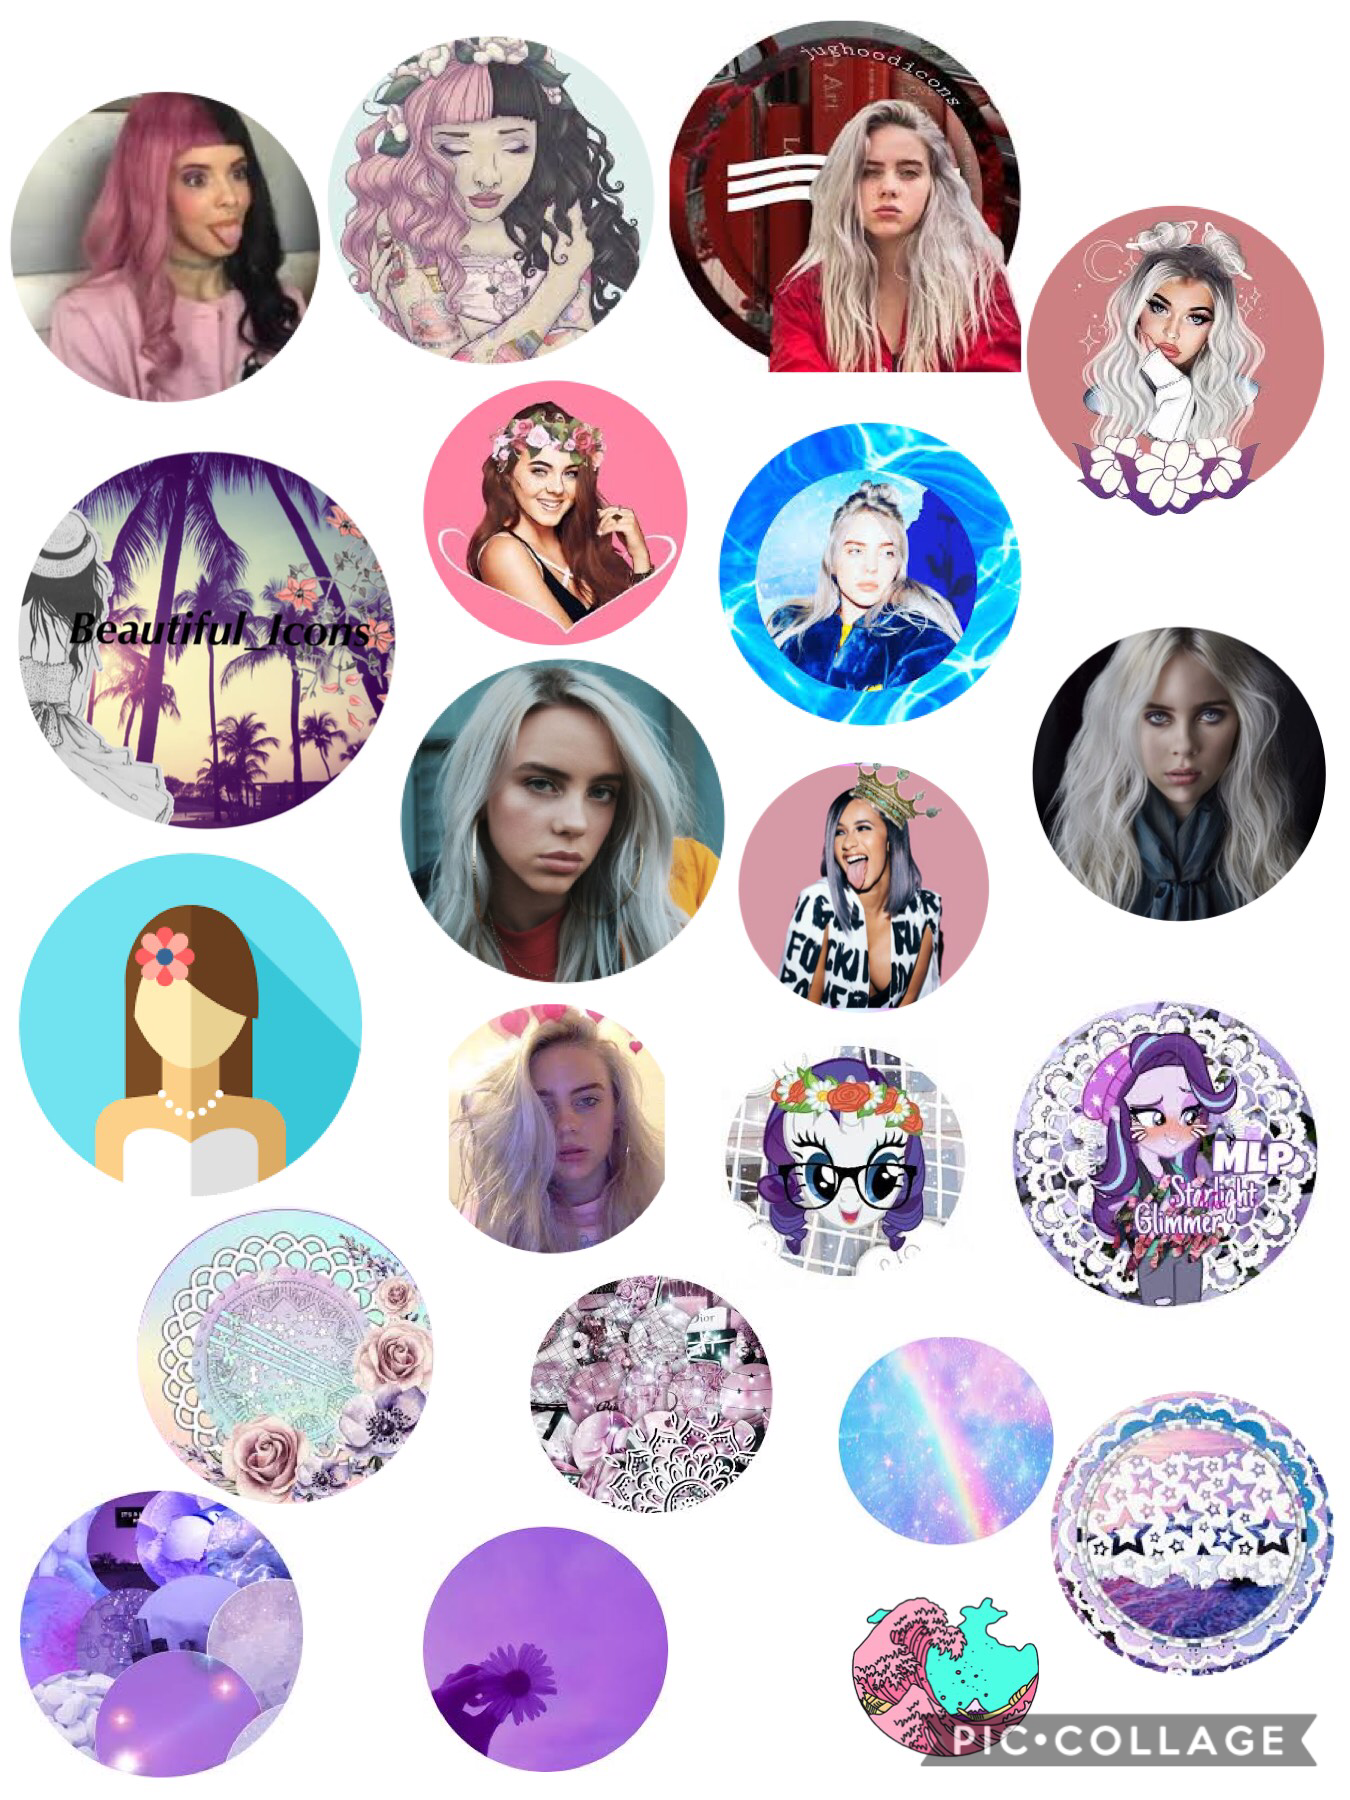 More Icons. Make sure to tell shyannjoiner thank you, if you do keep a icon, she got the question right. 